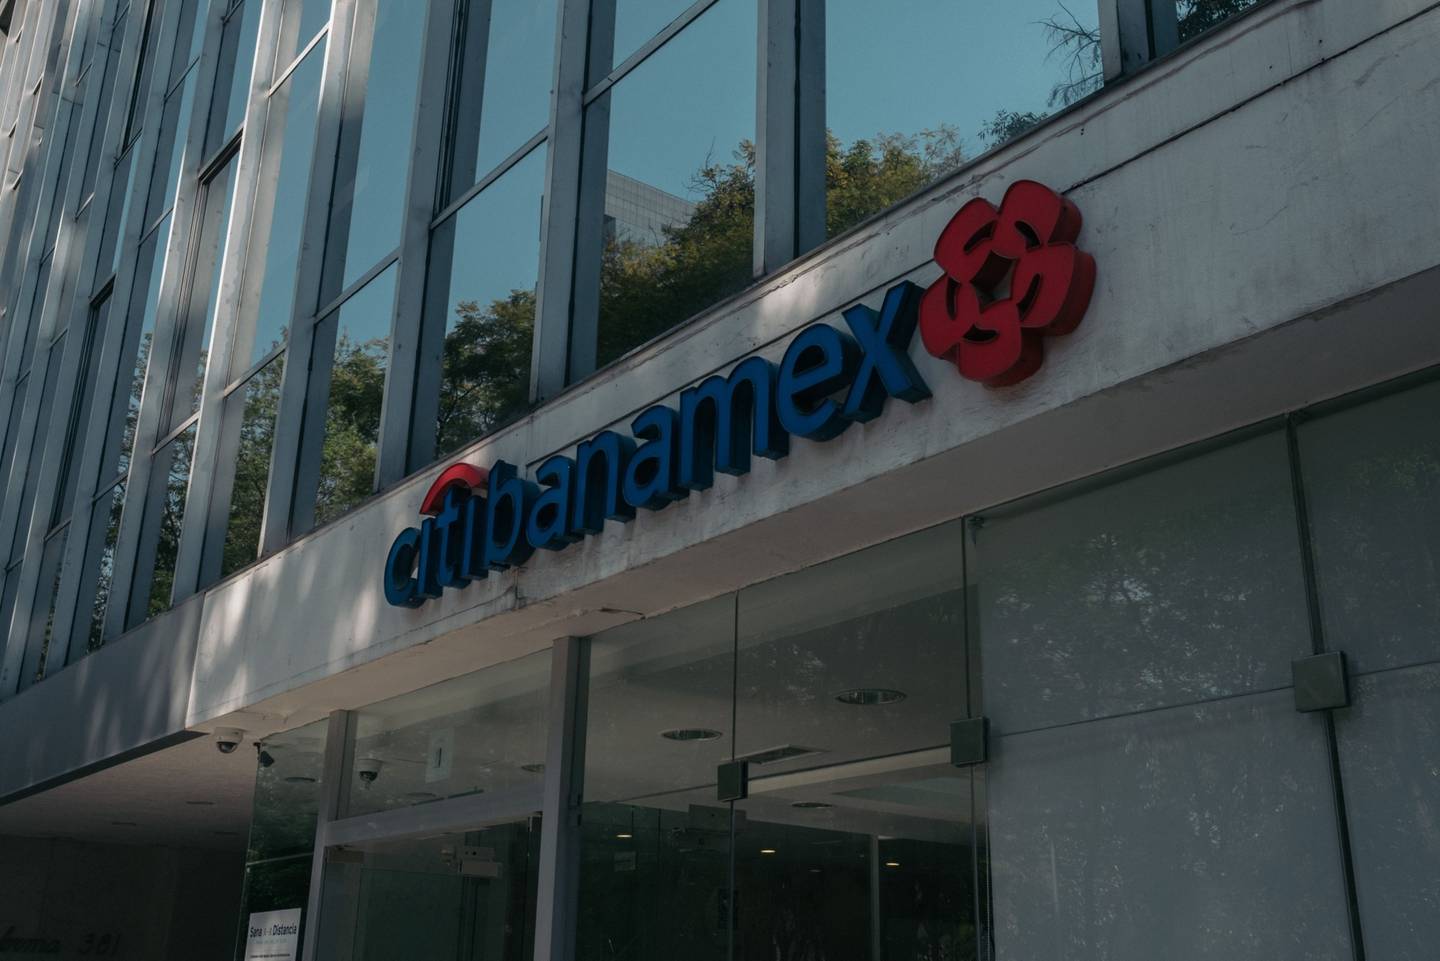 Citigroup announced the sale of Banamex, its Mexican retail banking division, on January 11.